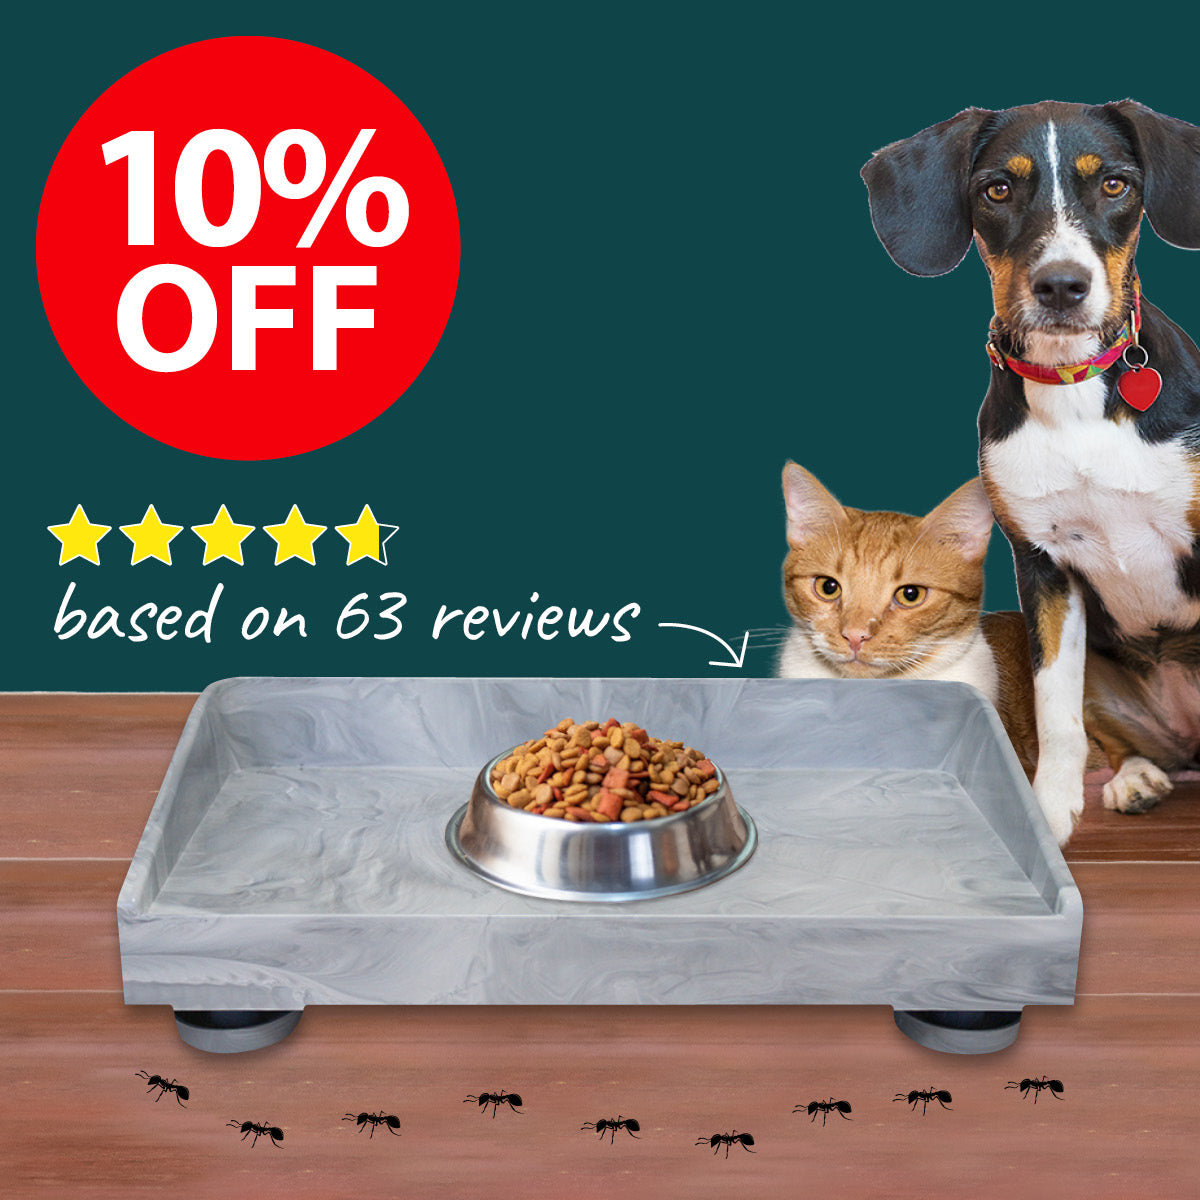 Ants Off - Elevated Pet Feeding Table ON SALE NOW